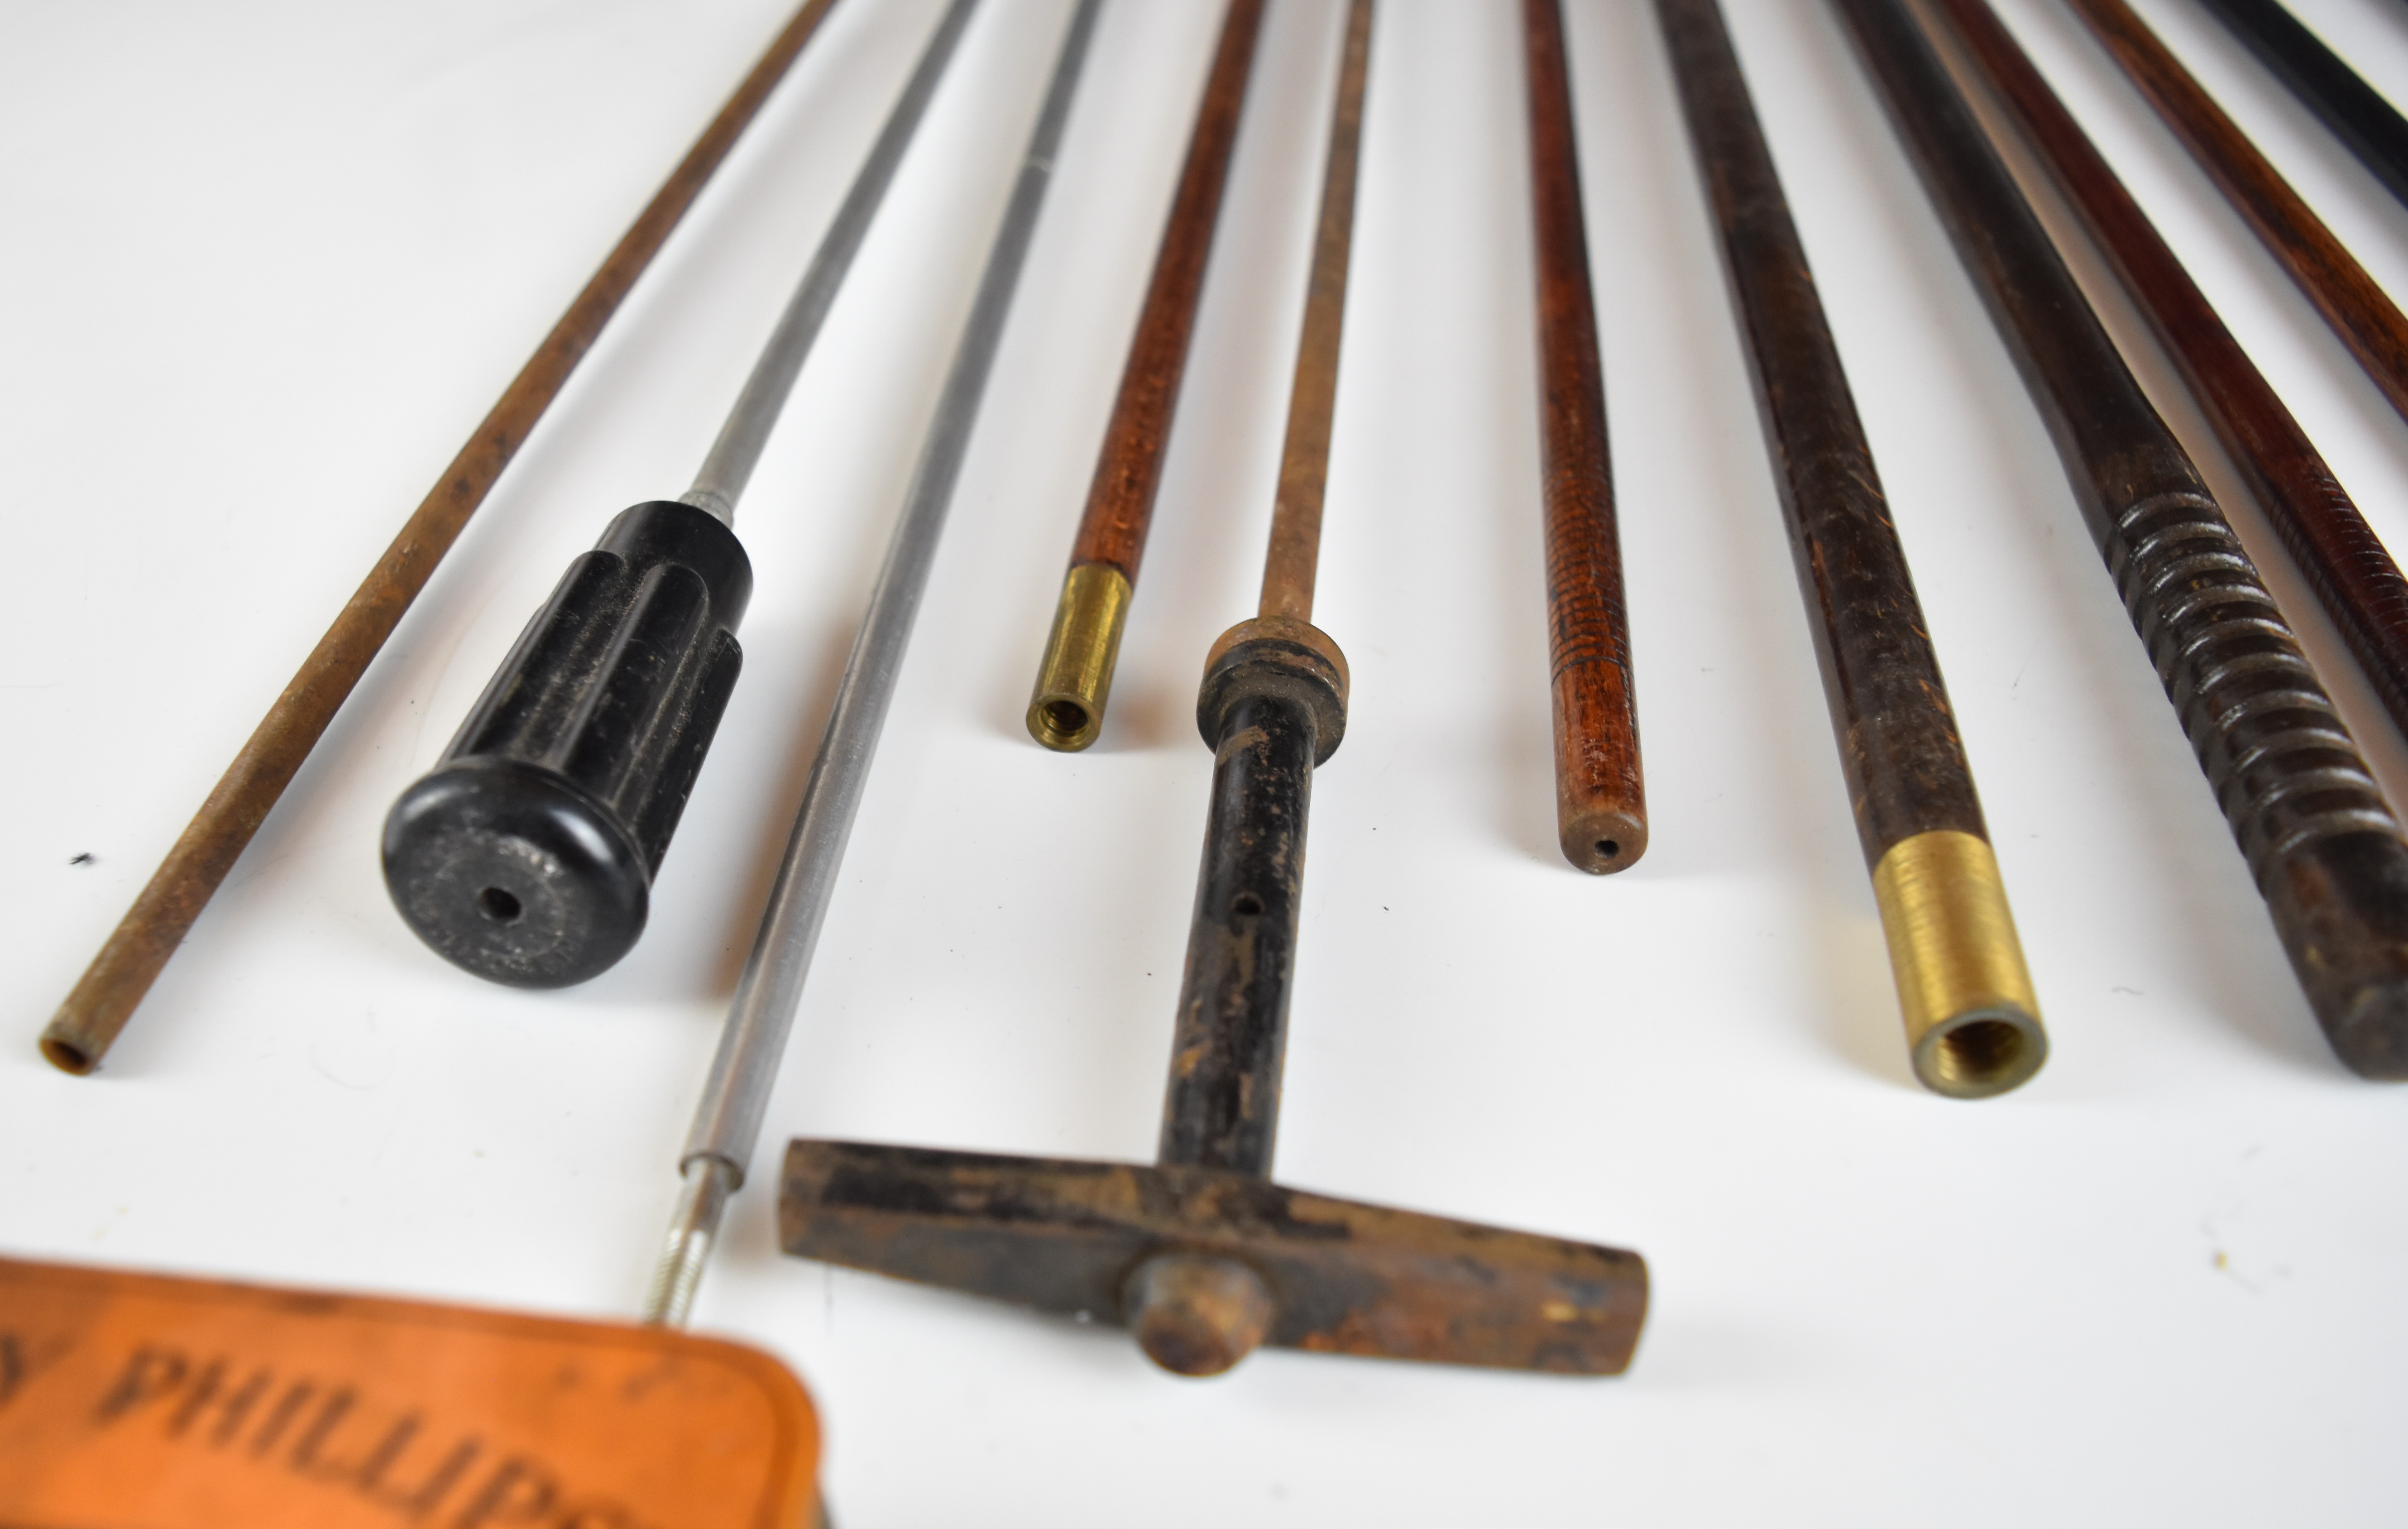 A collection of shotgun or rifle accessories including cleaning rods, powder flasks, gun locks etc. - Image 8 of 9